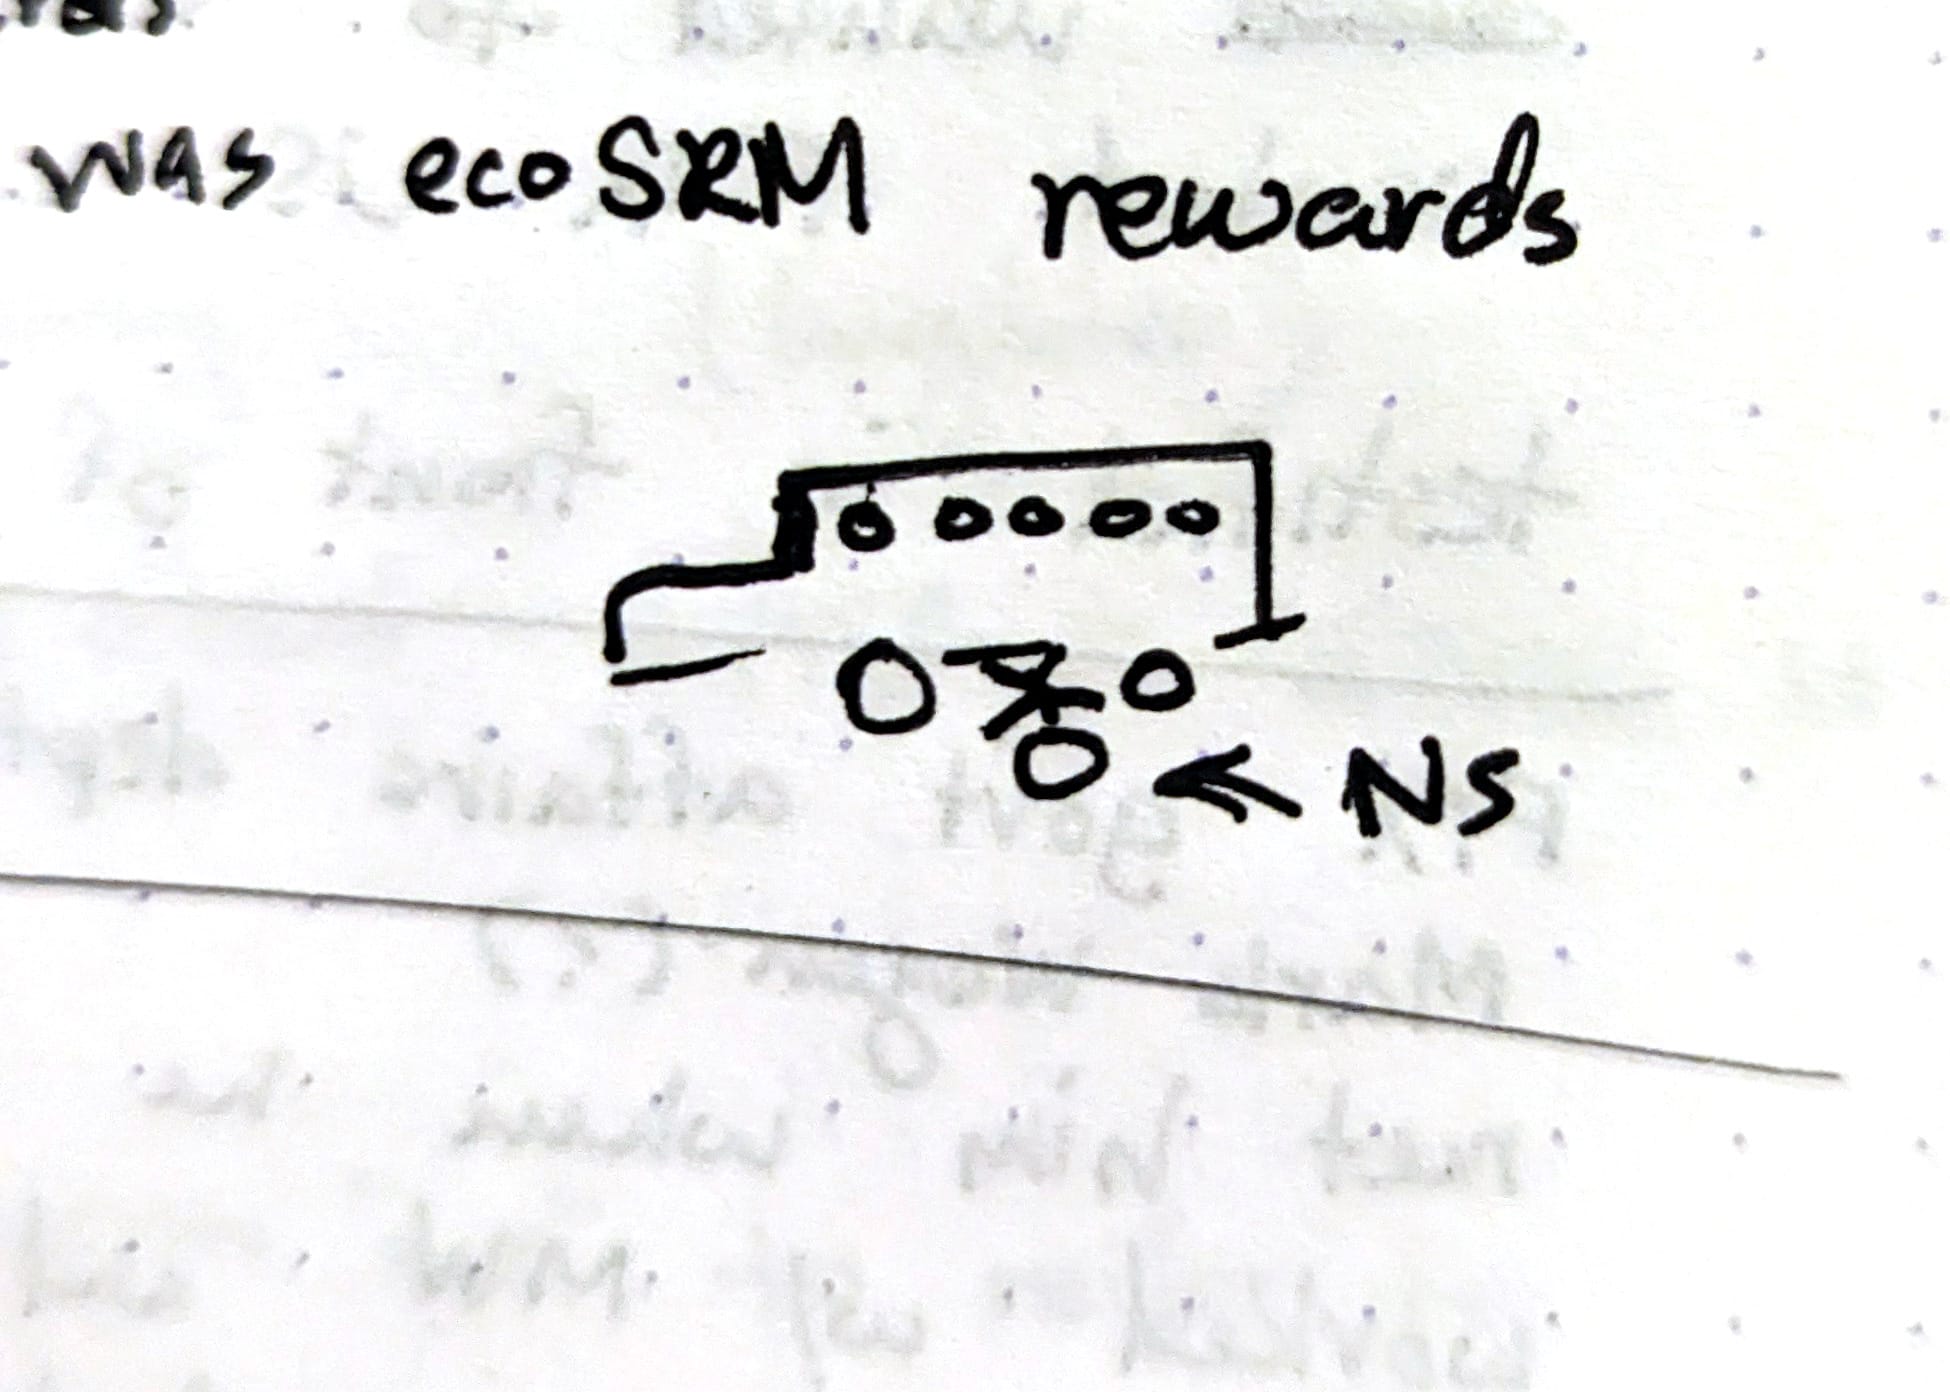 A small doodle of a bus, with a stick figure laying beneath it, and an arrow with "NS" pointing to the figure